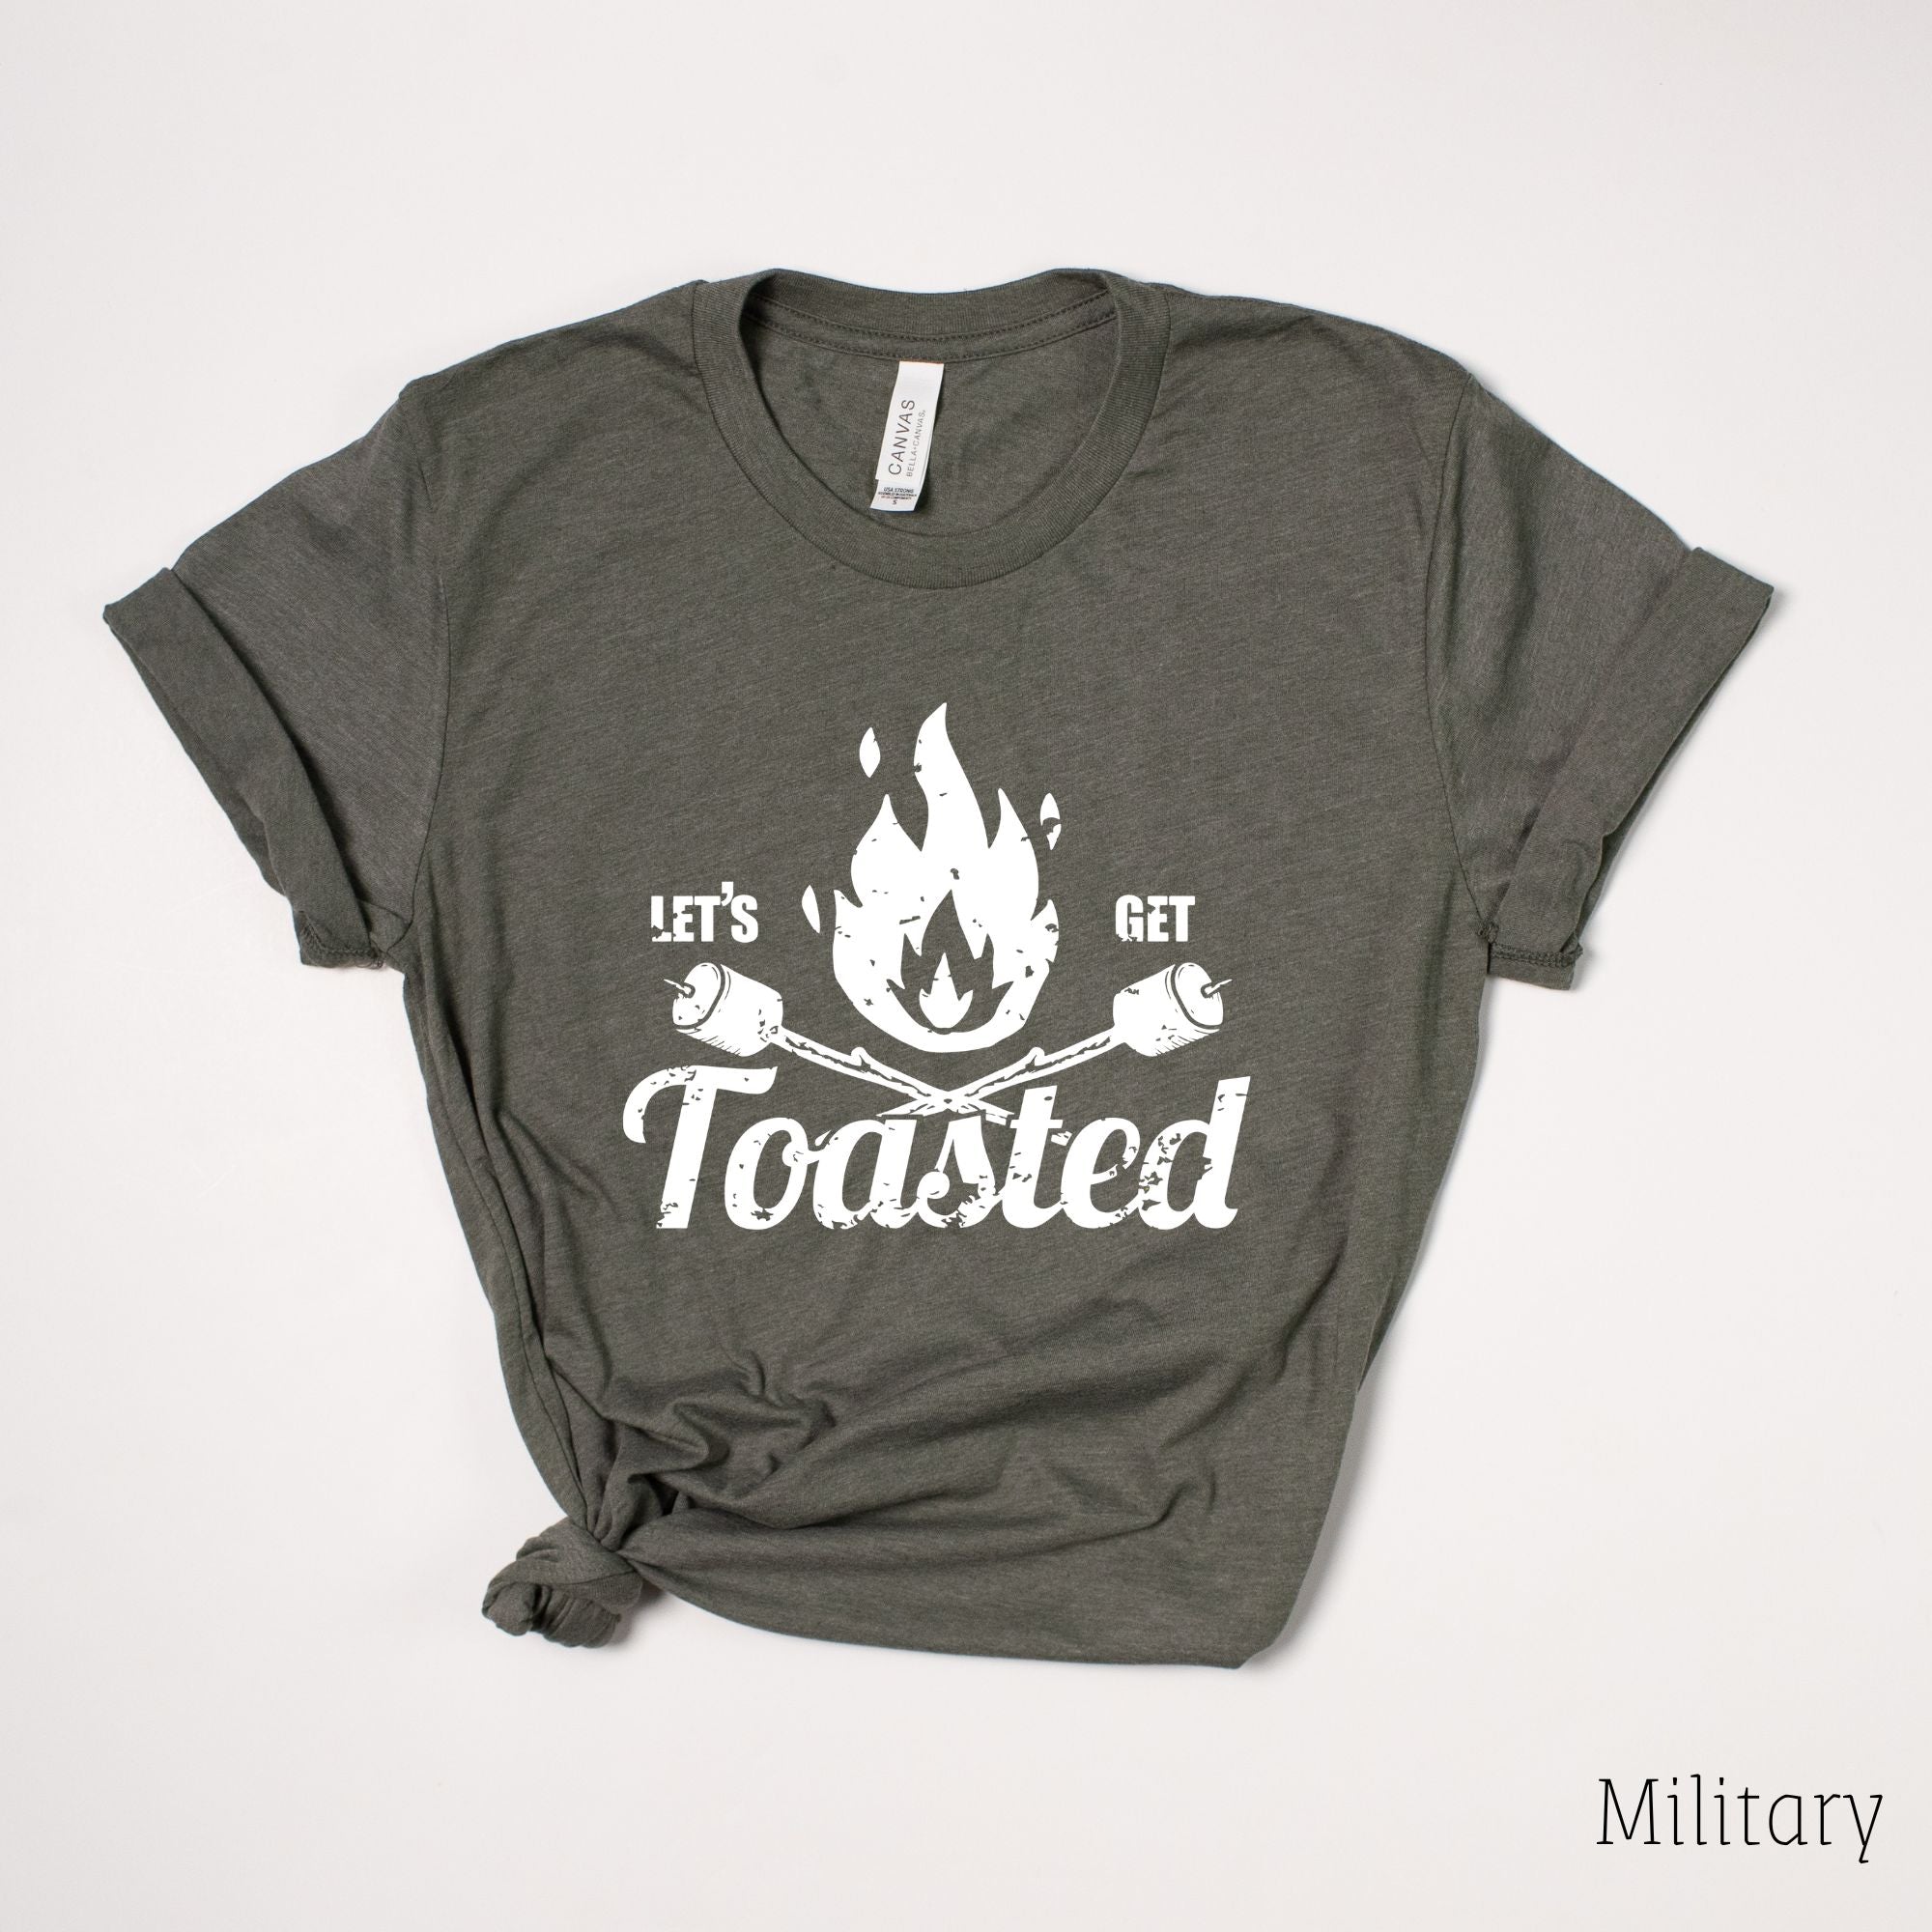 Funny Let's Get Toasted TShirt *UNISEX FIT*-208 Tees Wholesale, Idaho